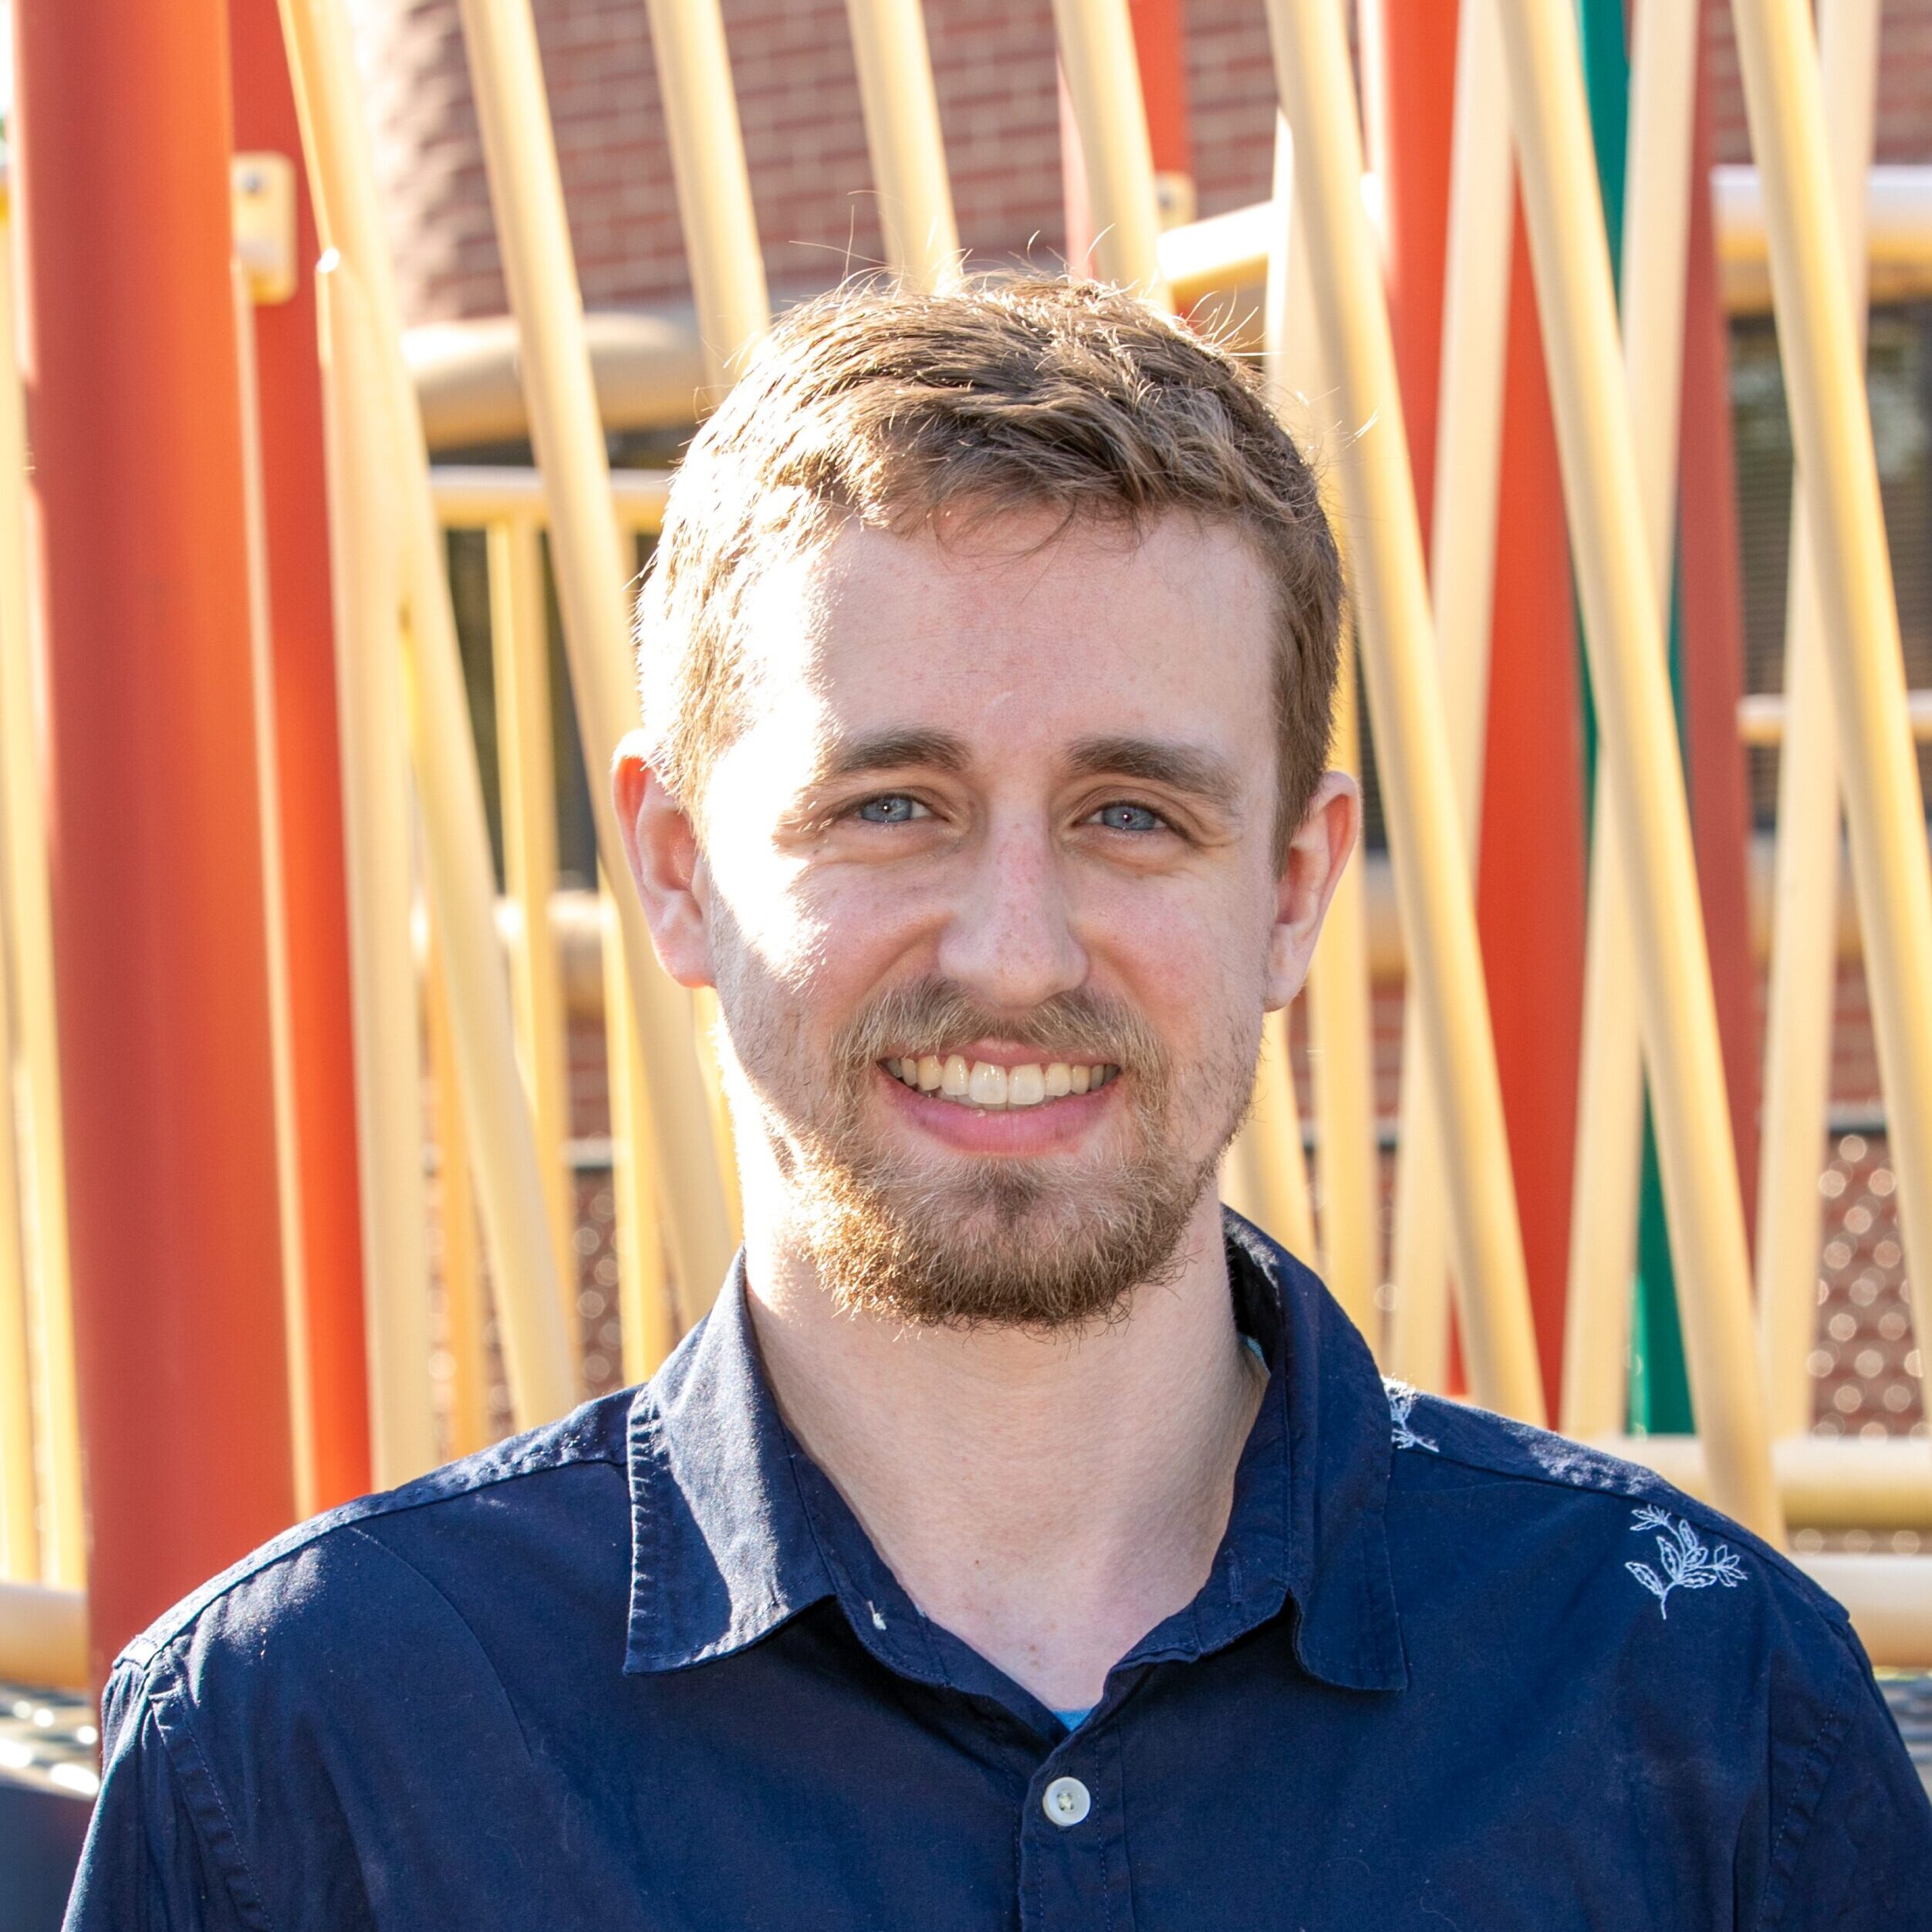 Blonde man smiling in a playground